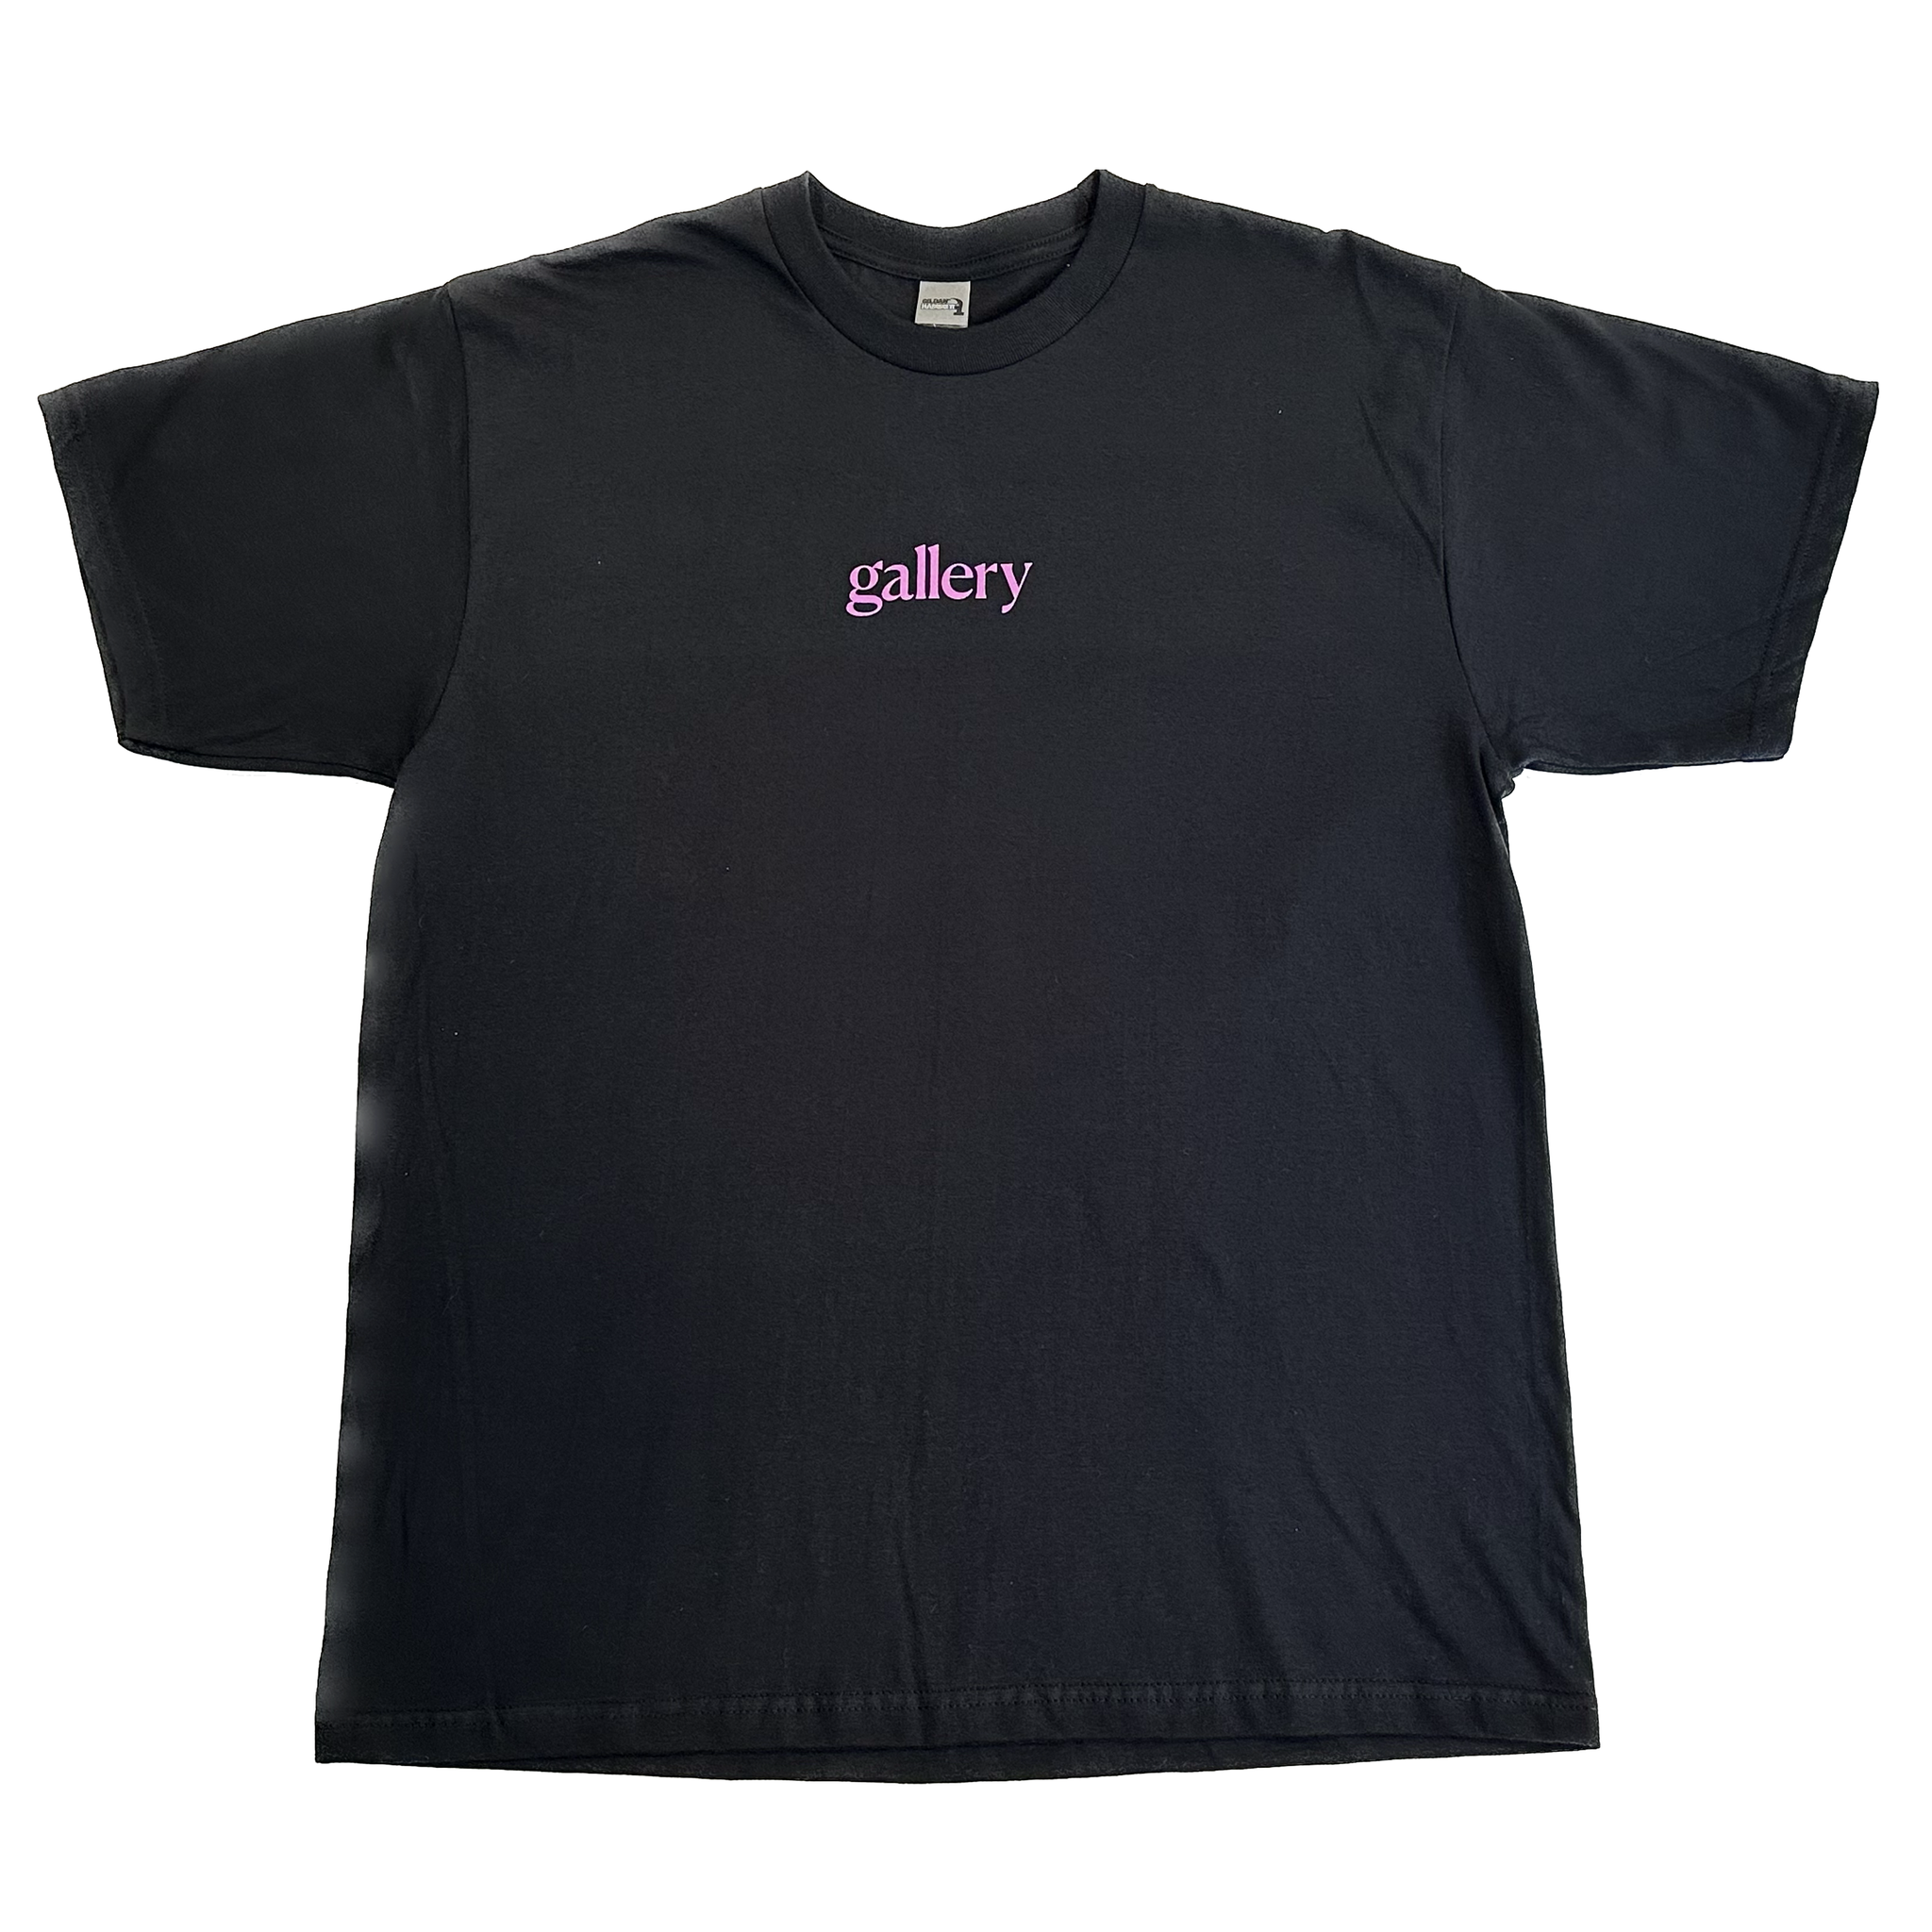 GALLERY DISCOGRAPHY TEE - BLACK